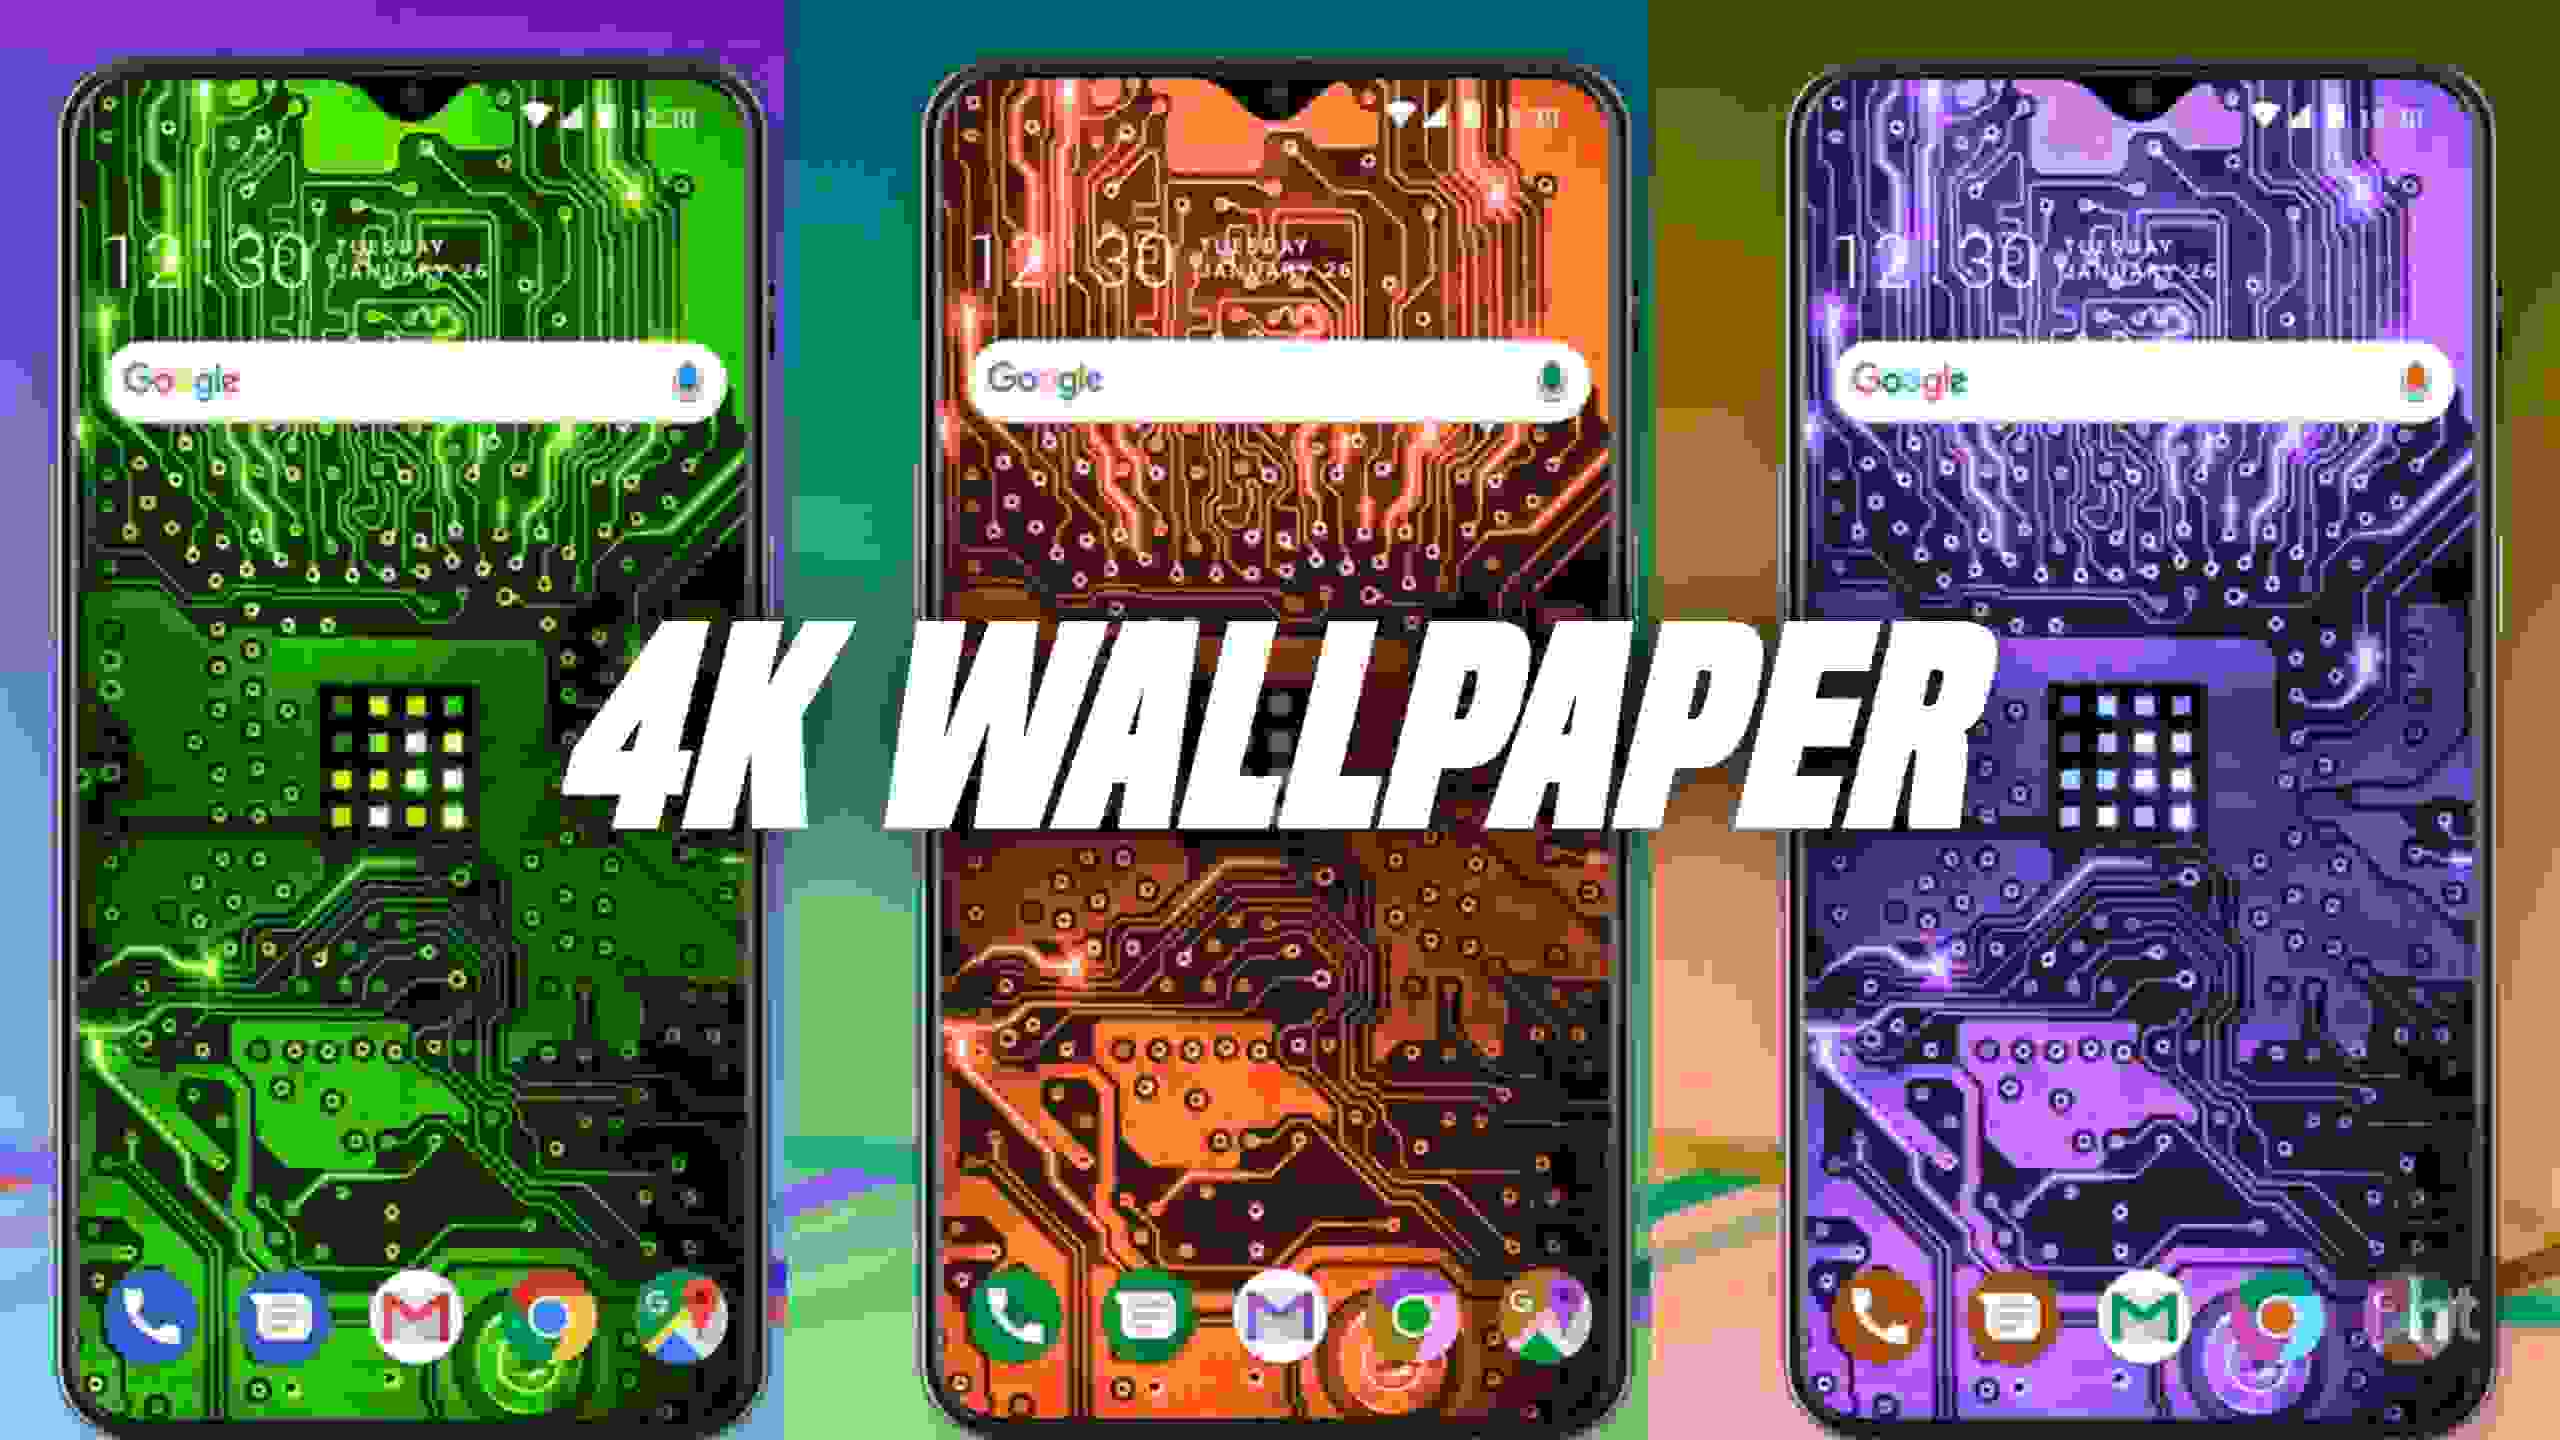 Set the 4K Live Wallpapers on your phone using live wallpapers app